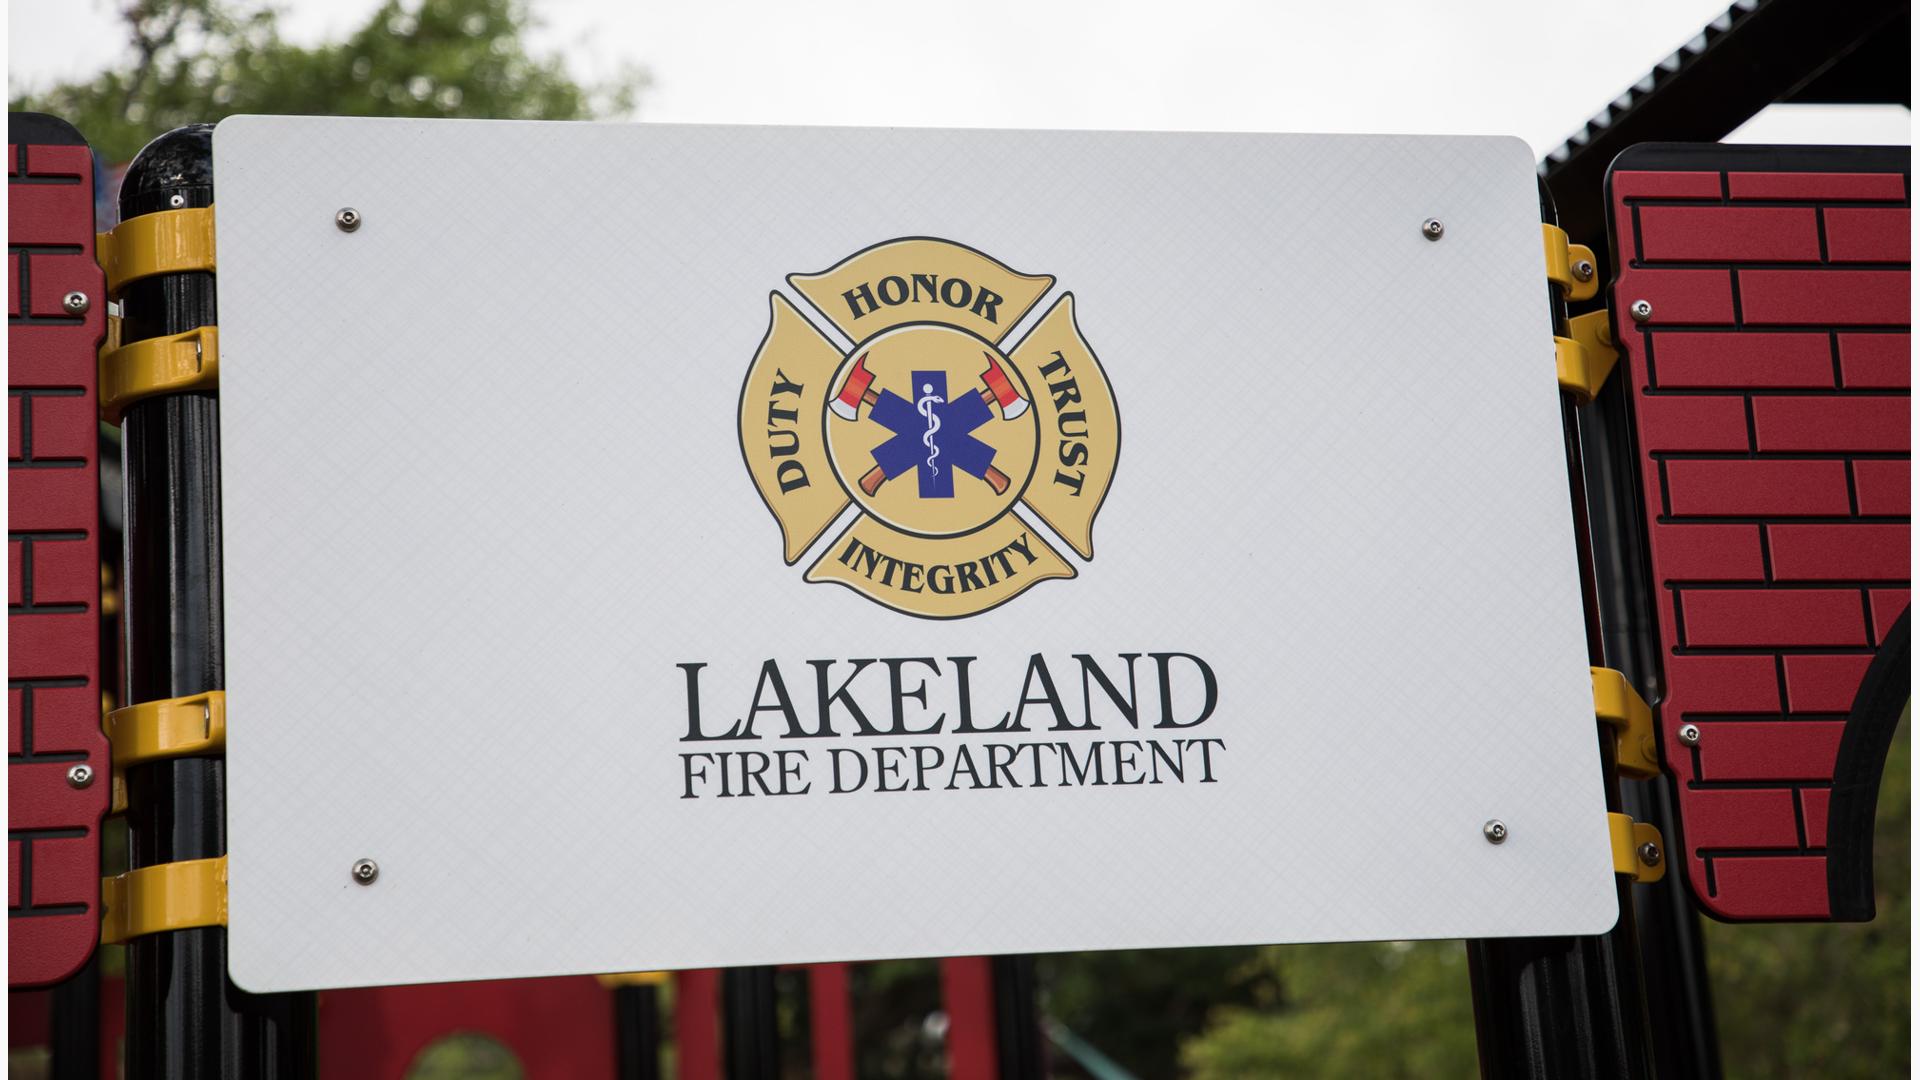 Detail of custom fire department signage